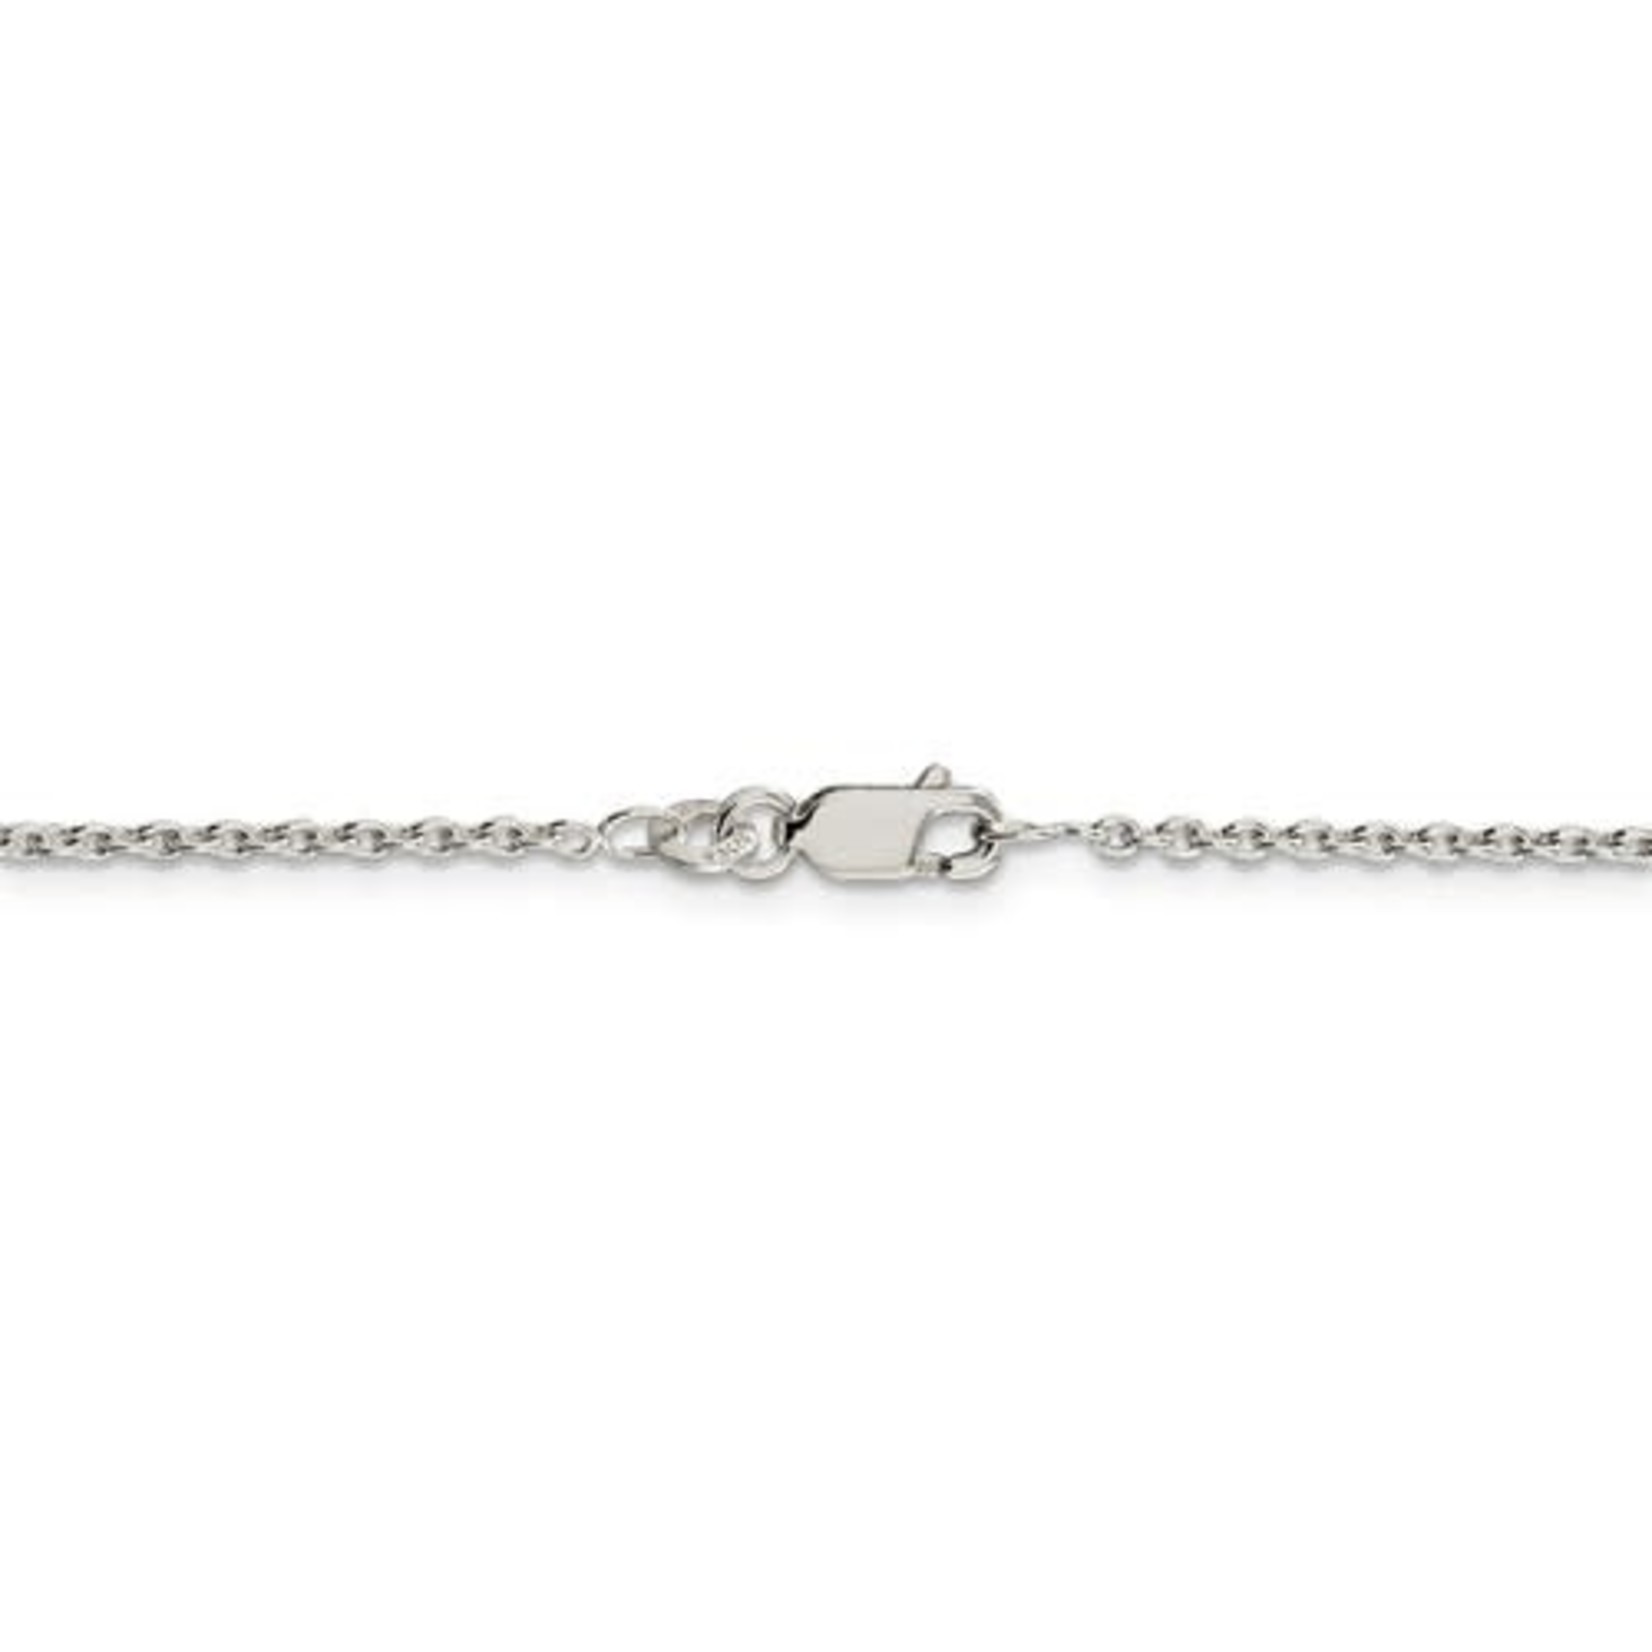 This Is Life Cable Chain - Sterling Silver 18"